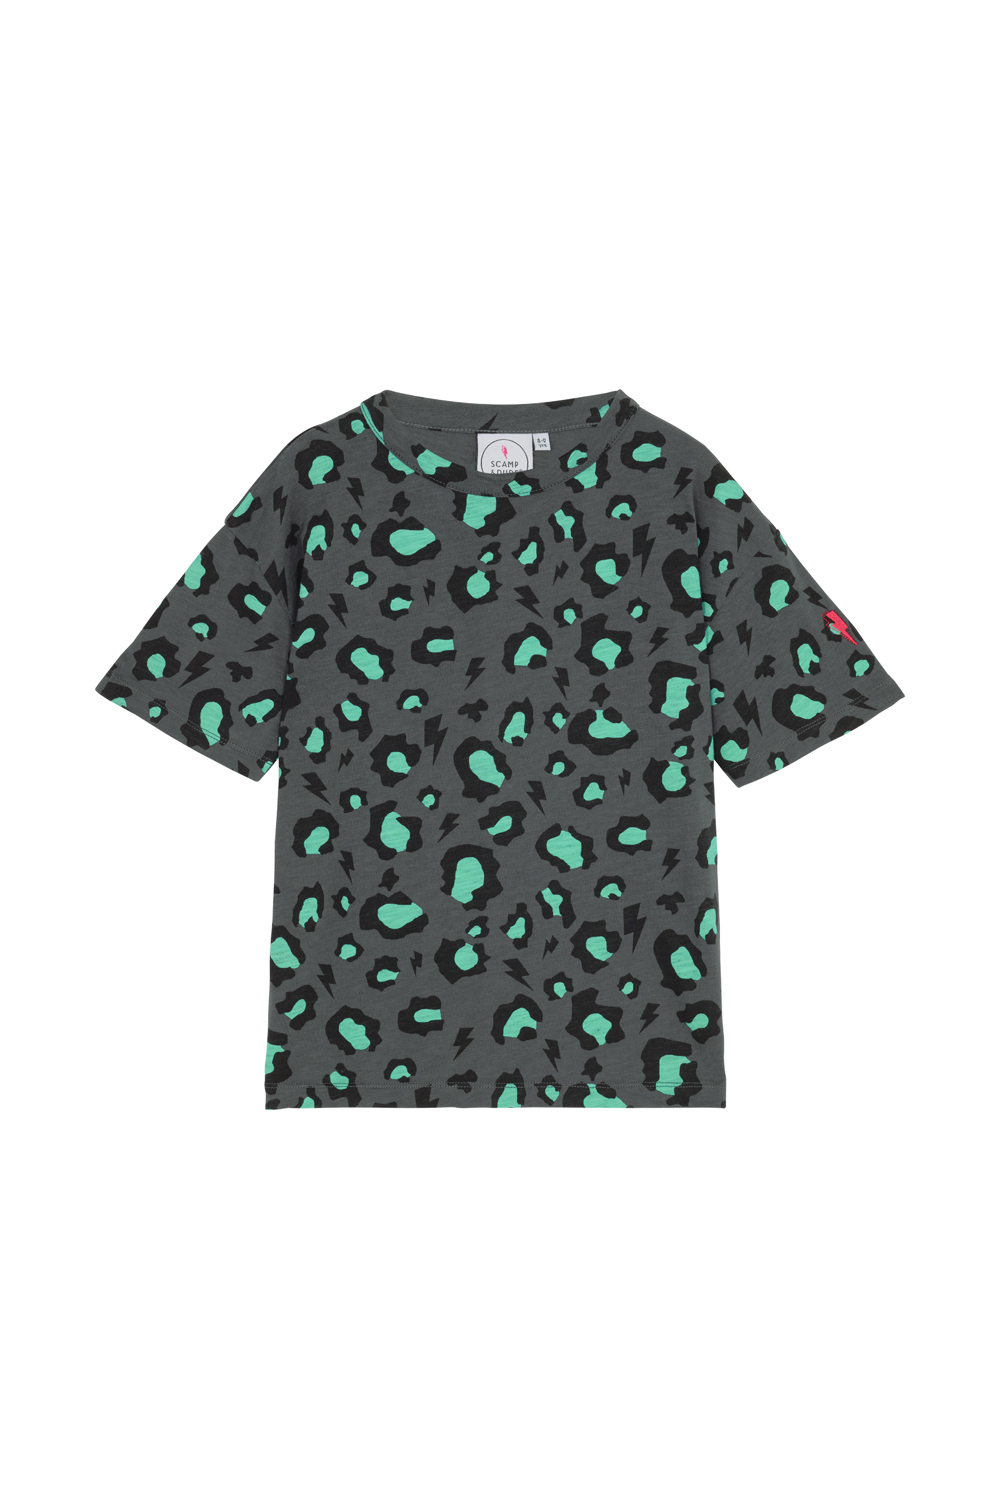 Kids Grey with Green Snow Leopard T-shirt – Scamp & Dude